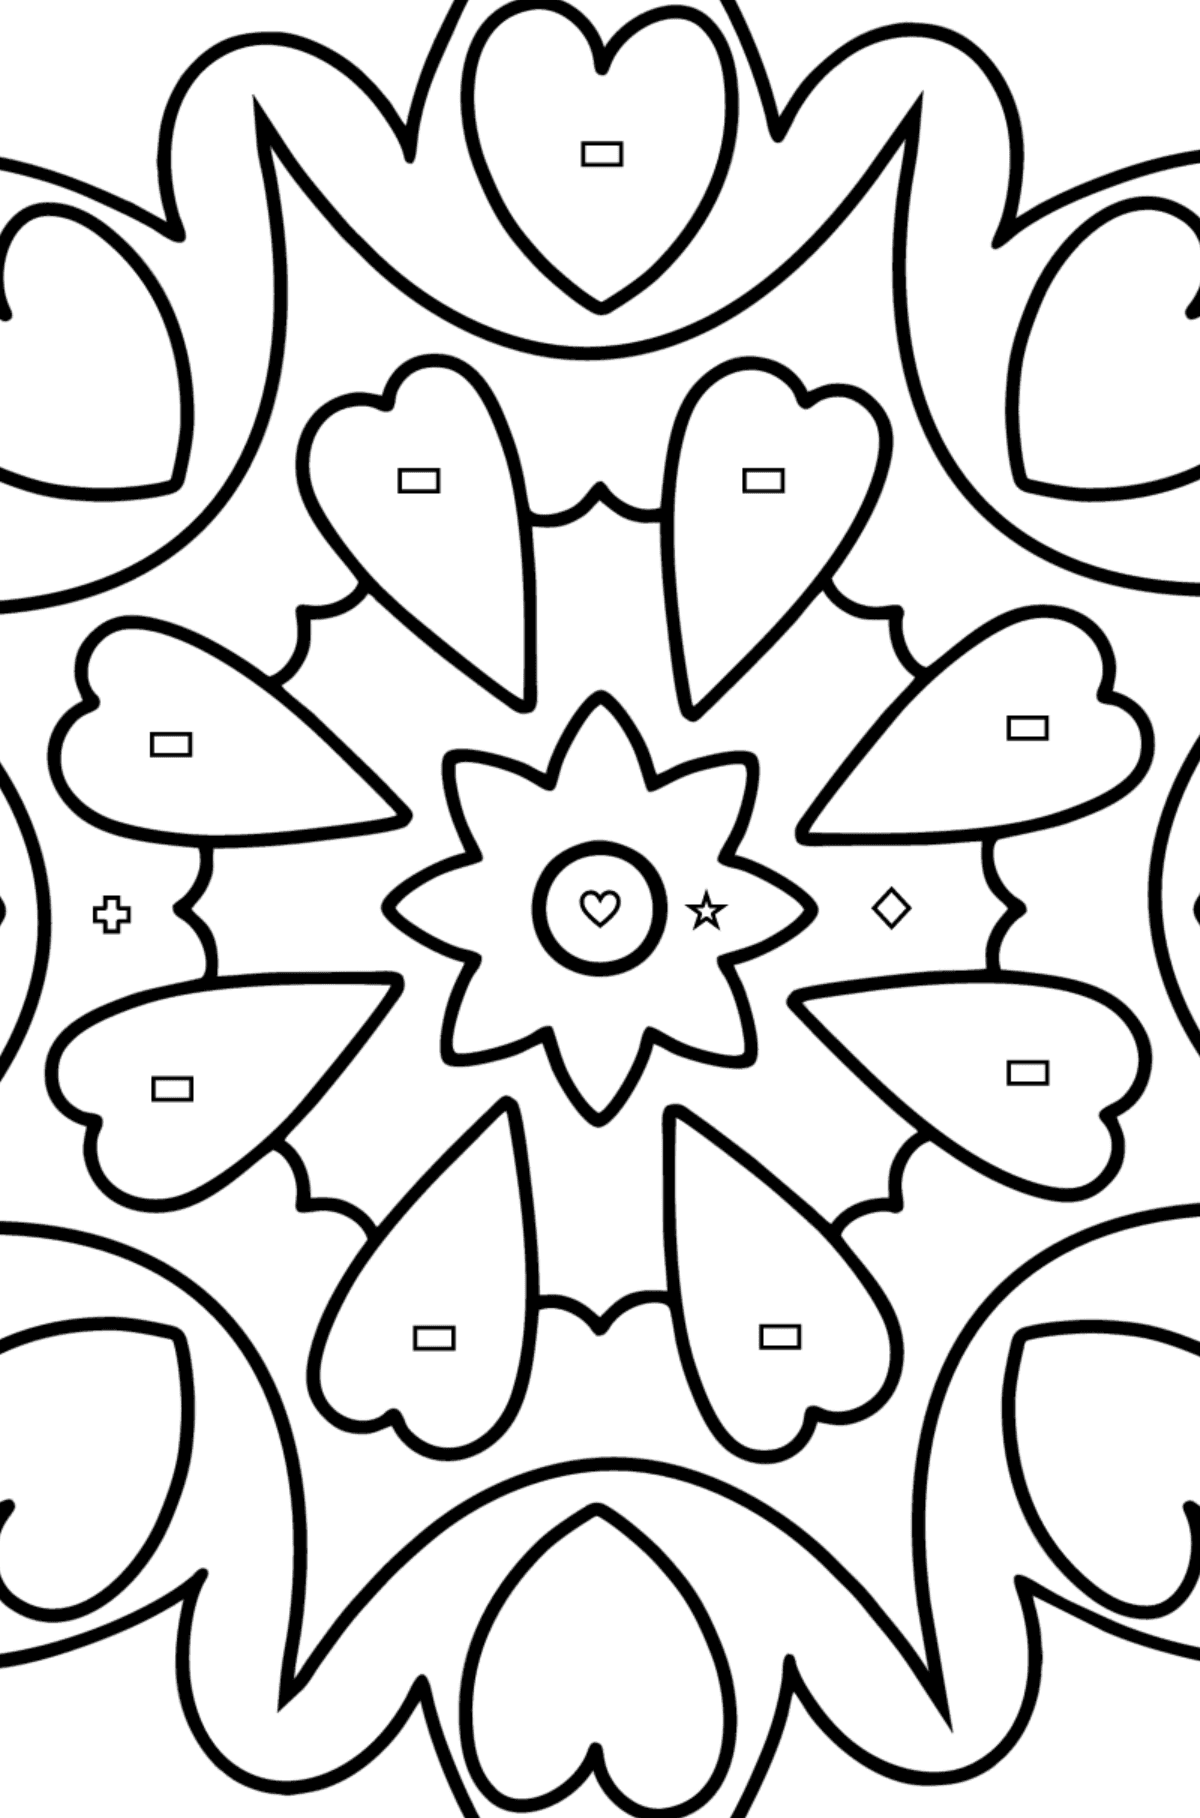 Mandala coloring page - 21 elements - Coloring by Geometric Shapes for Kids